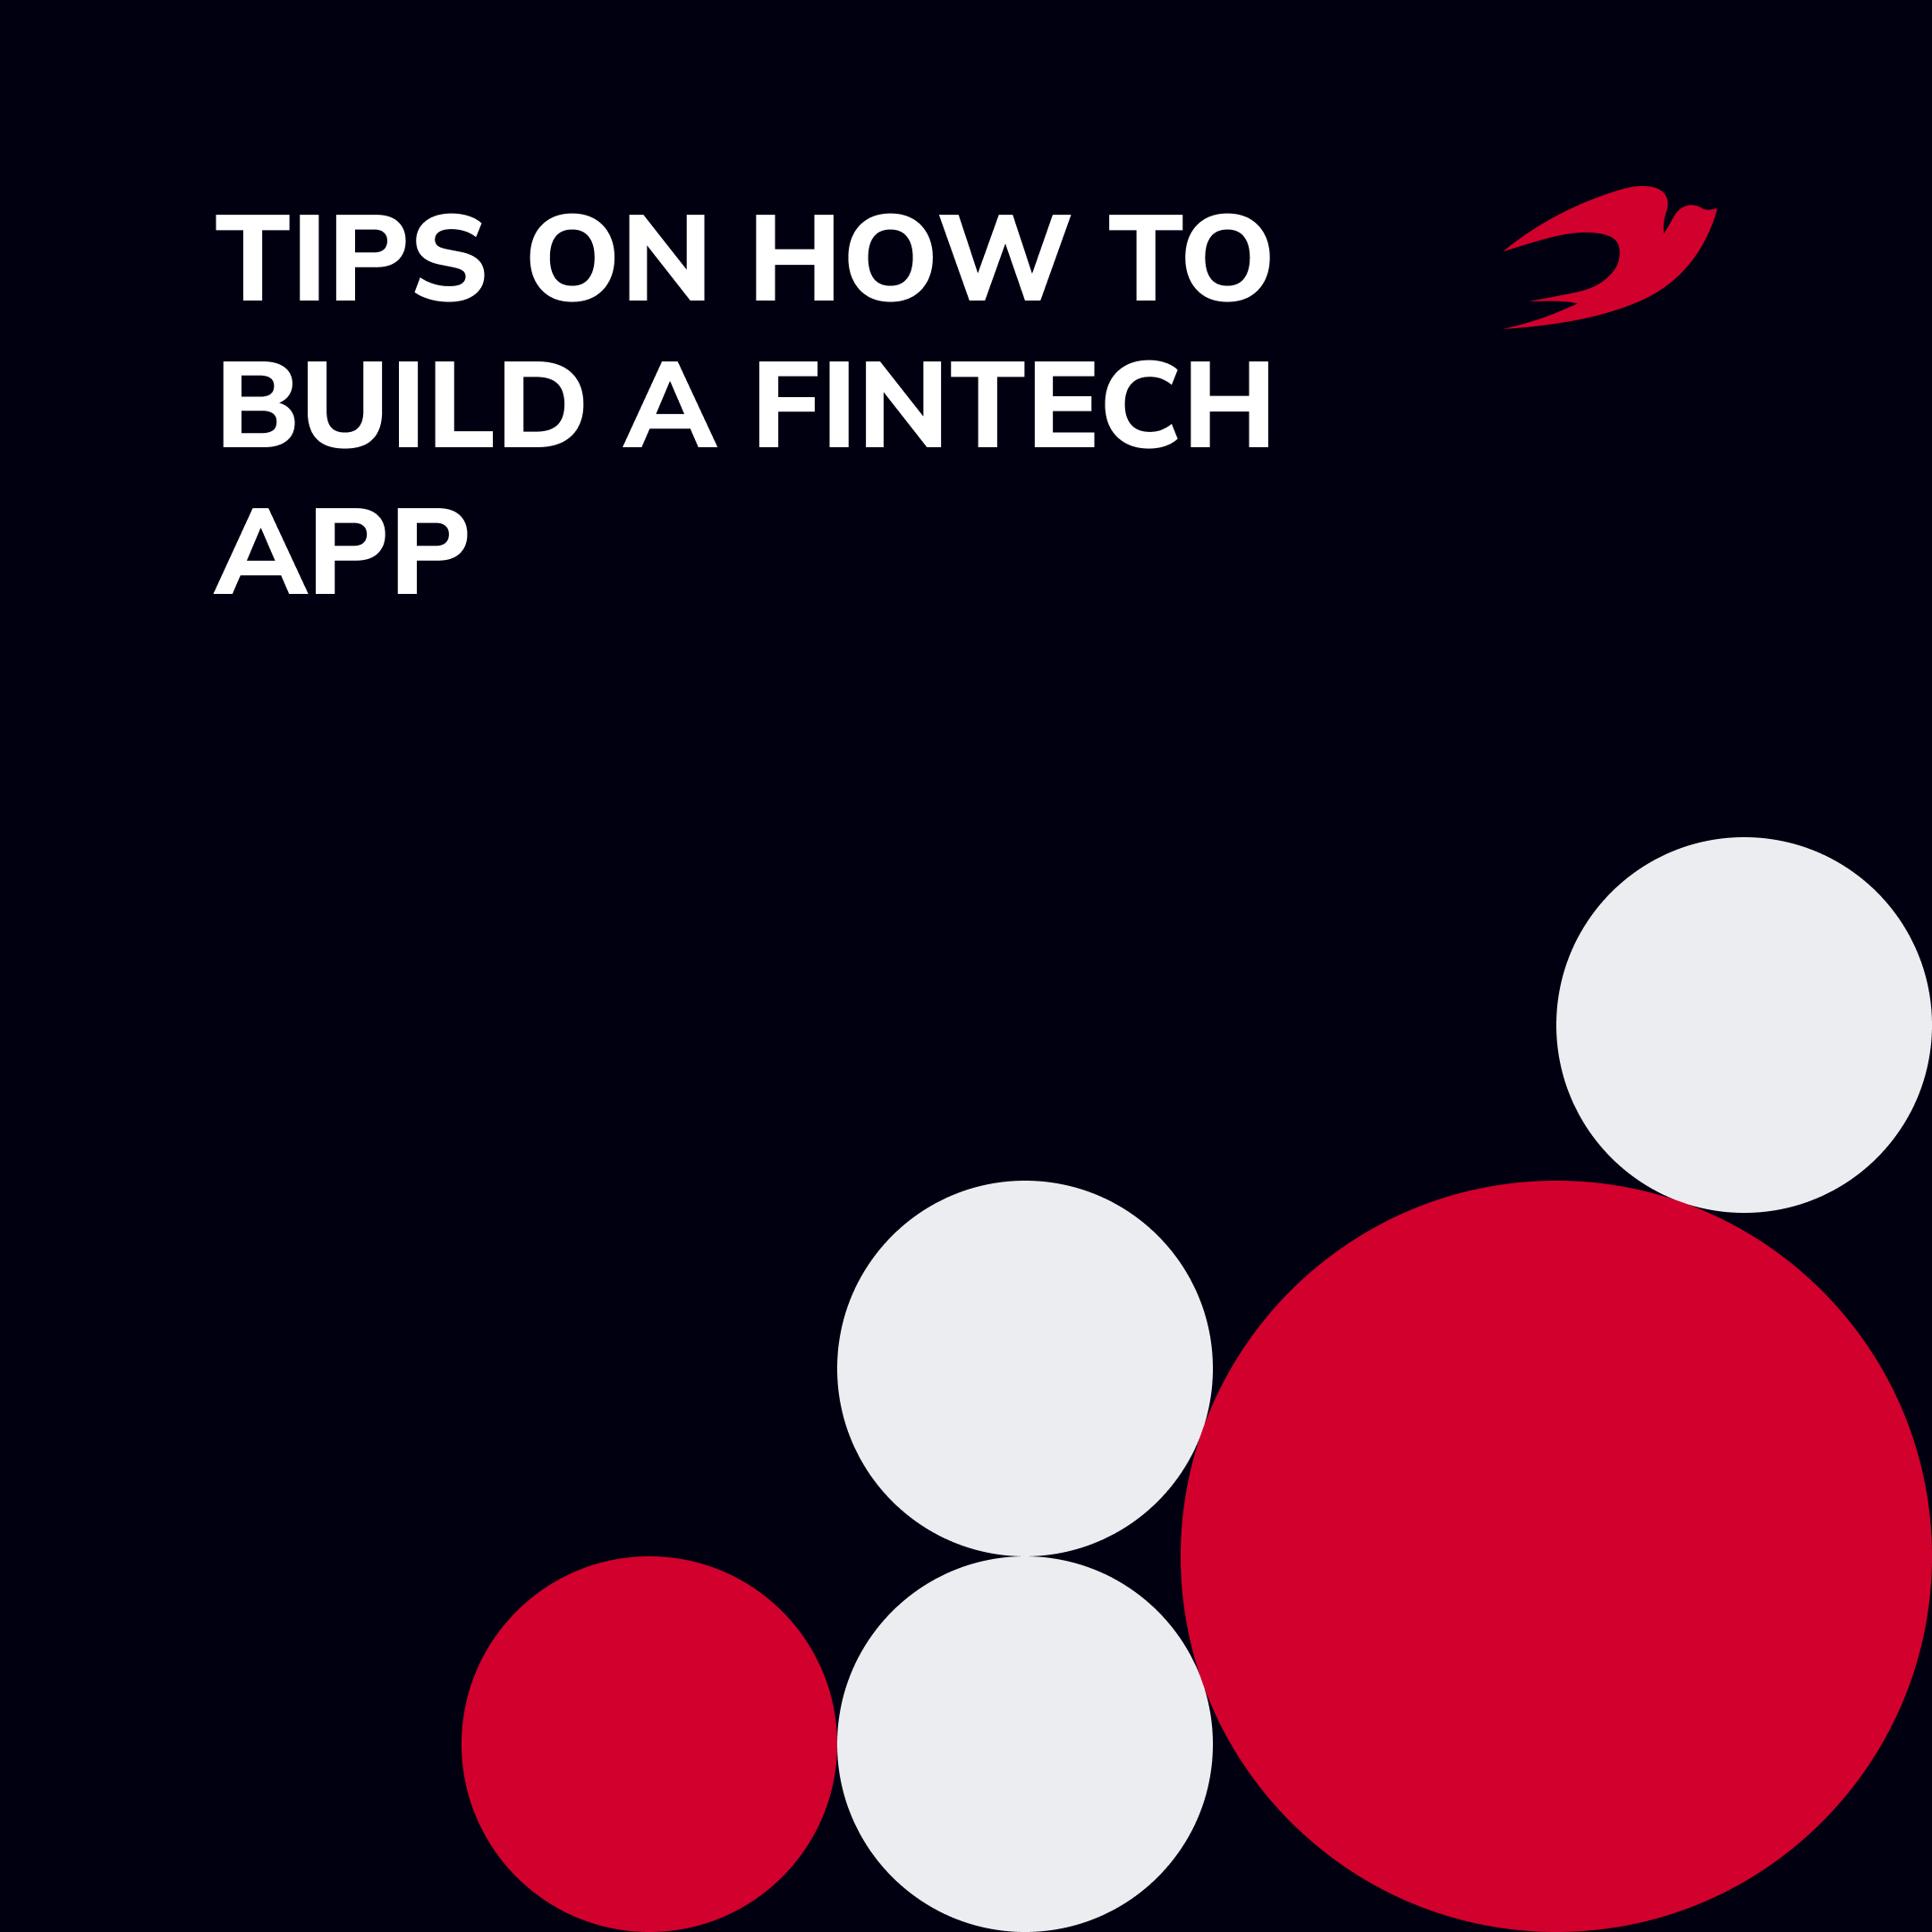 Tips on How to Build a Fintech App